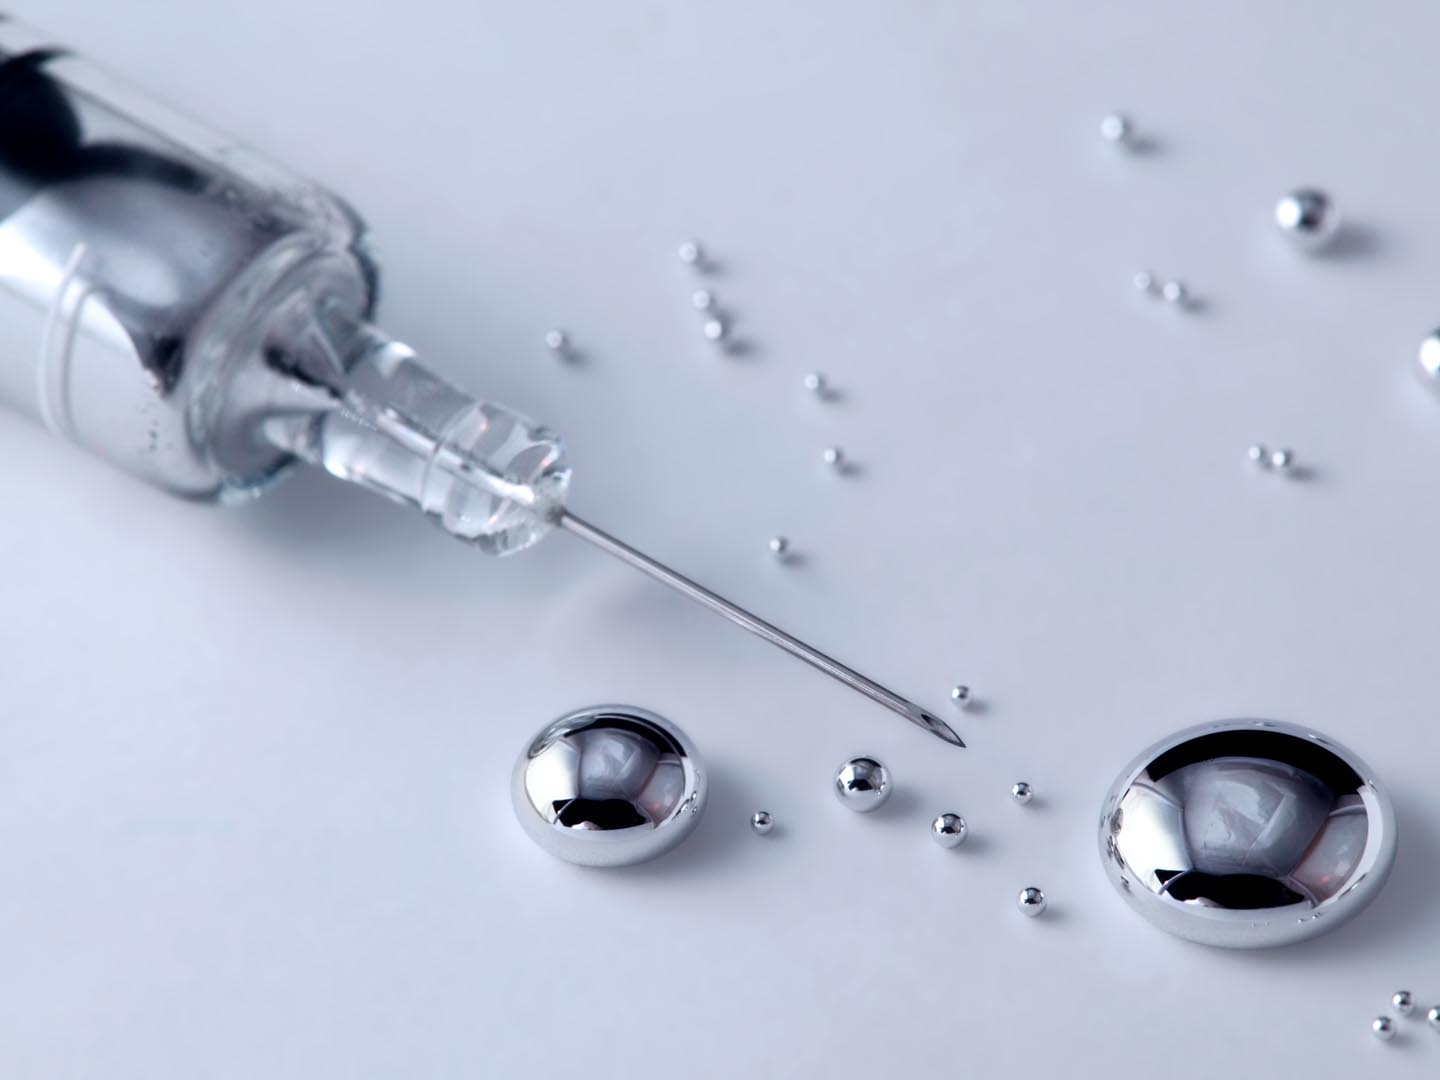 Hypodermic vaccine syringe with fine needle for less pain, filled with mercury